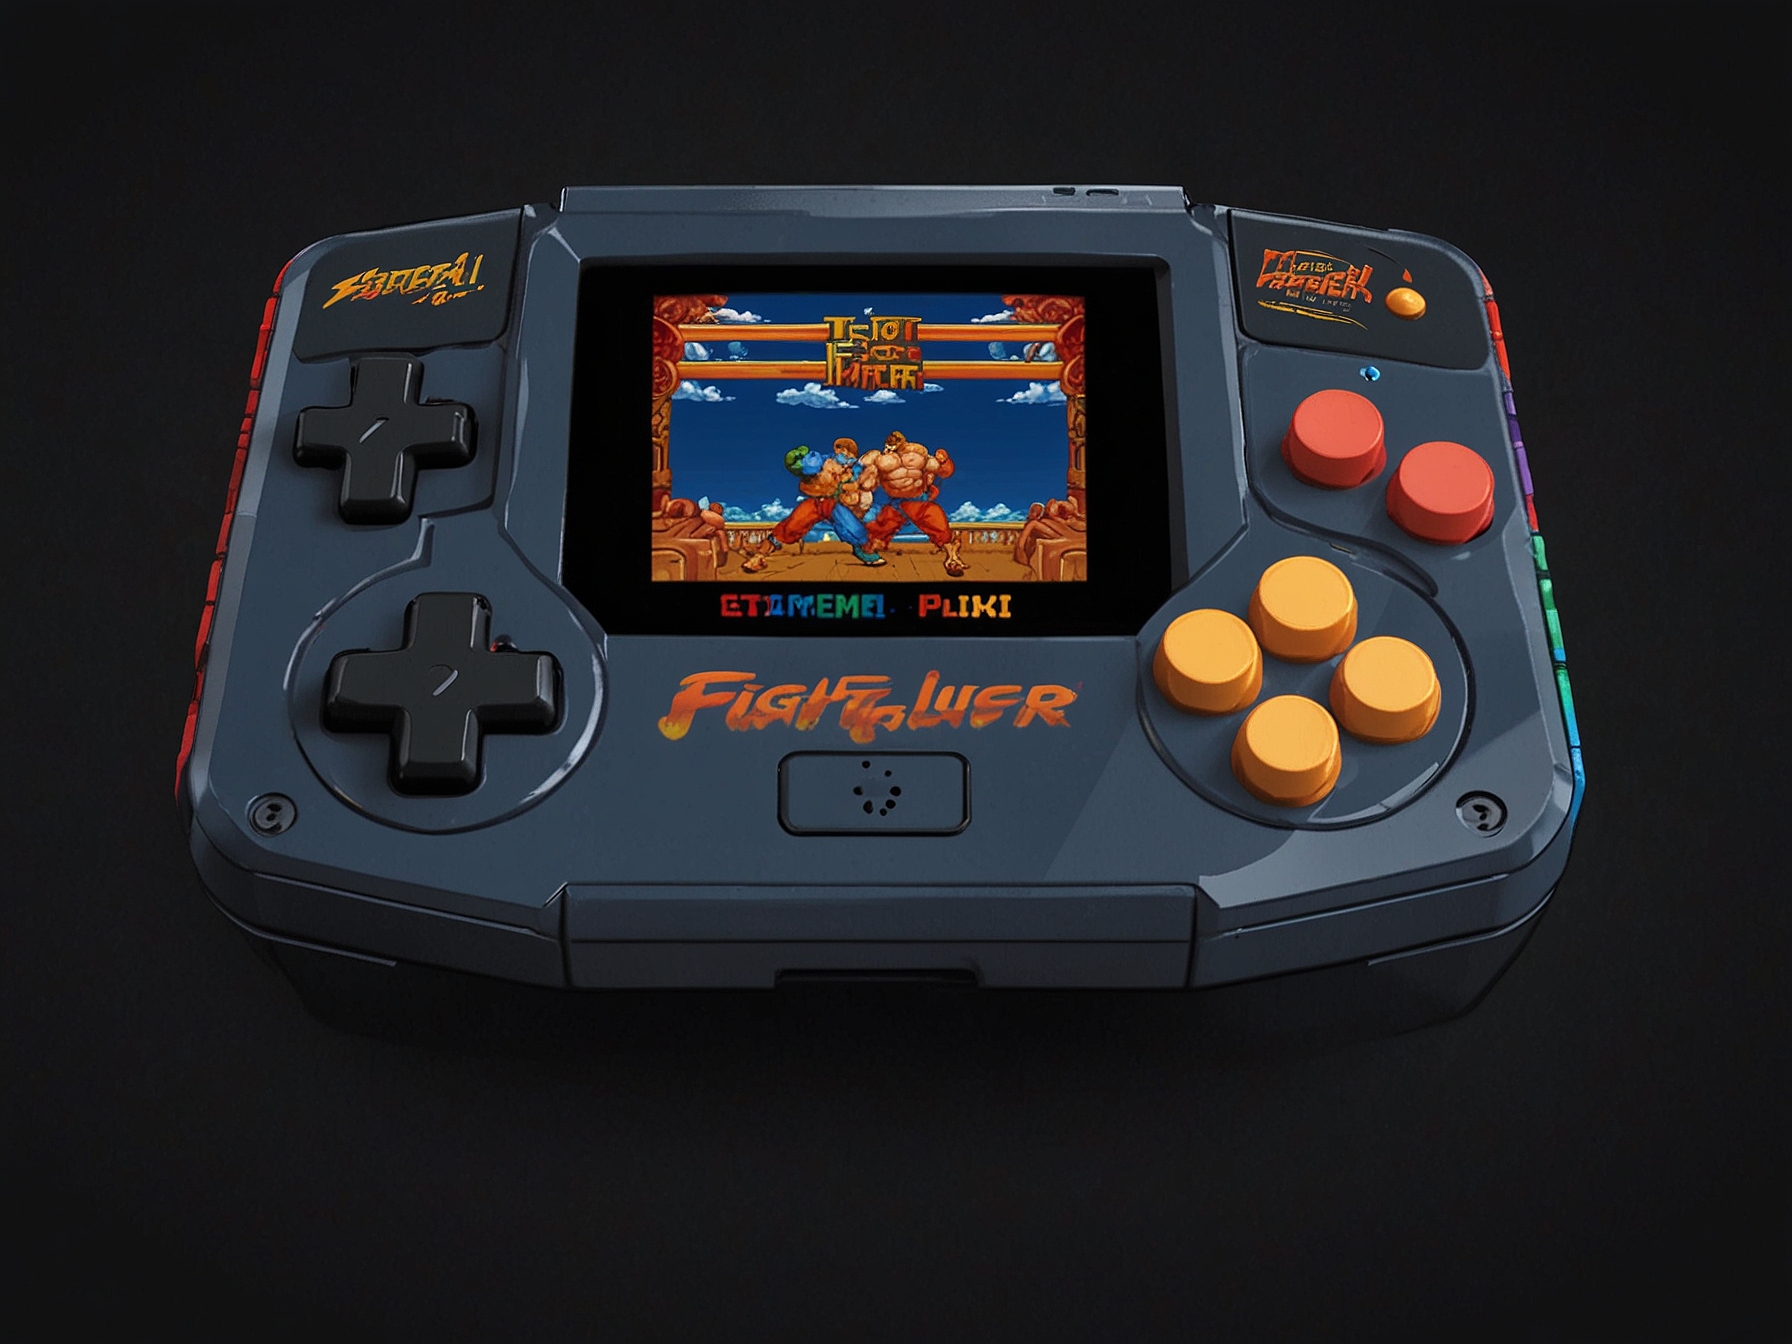 A bright, colorful handheld console from My Arcade Pocket Player series showcasing the game screen of Street Fighter II, highlighting its intuitive button layout for effortless gameplay.